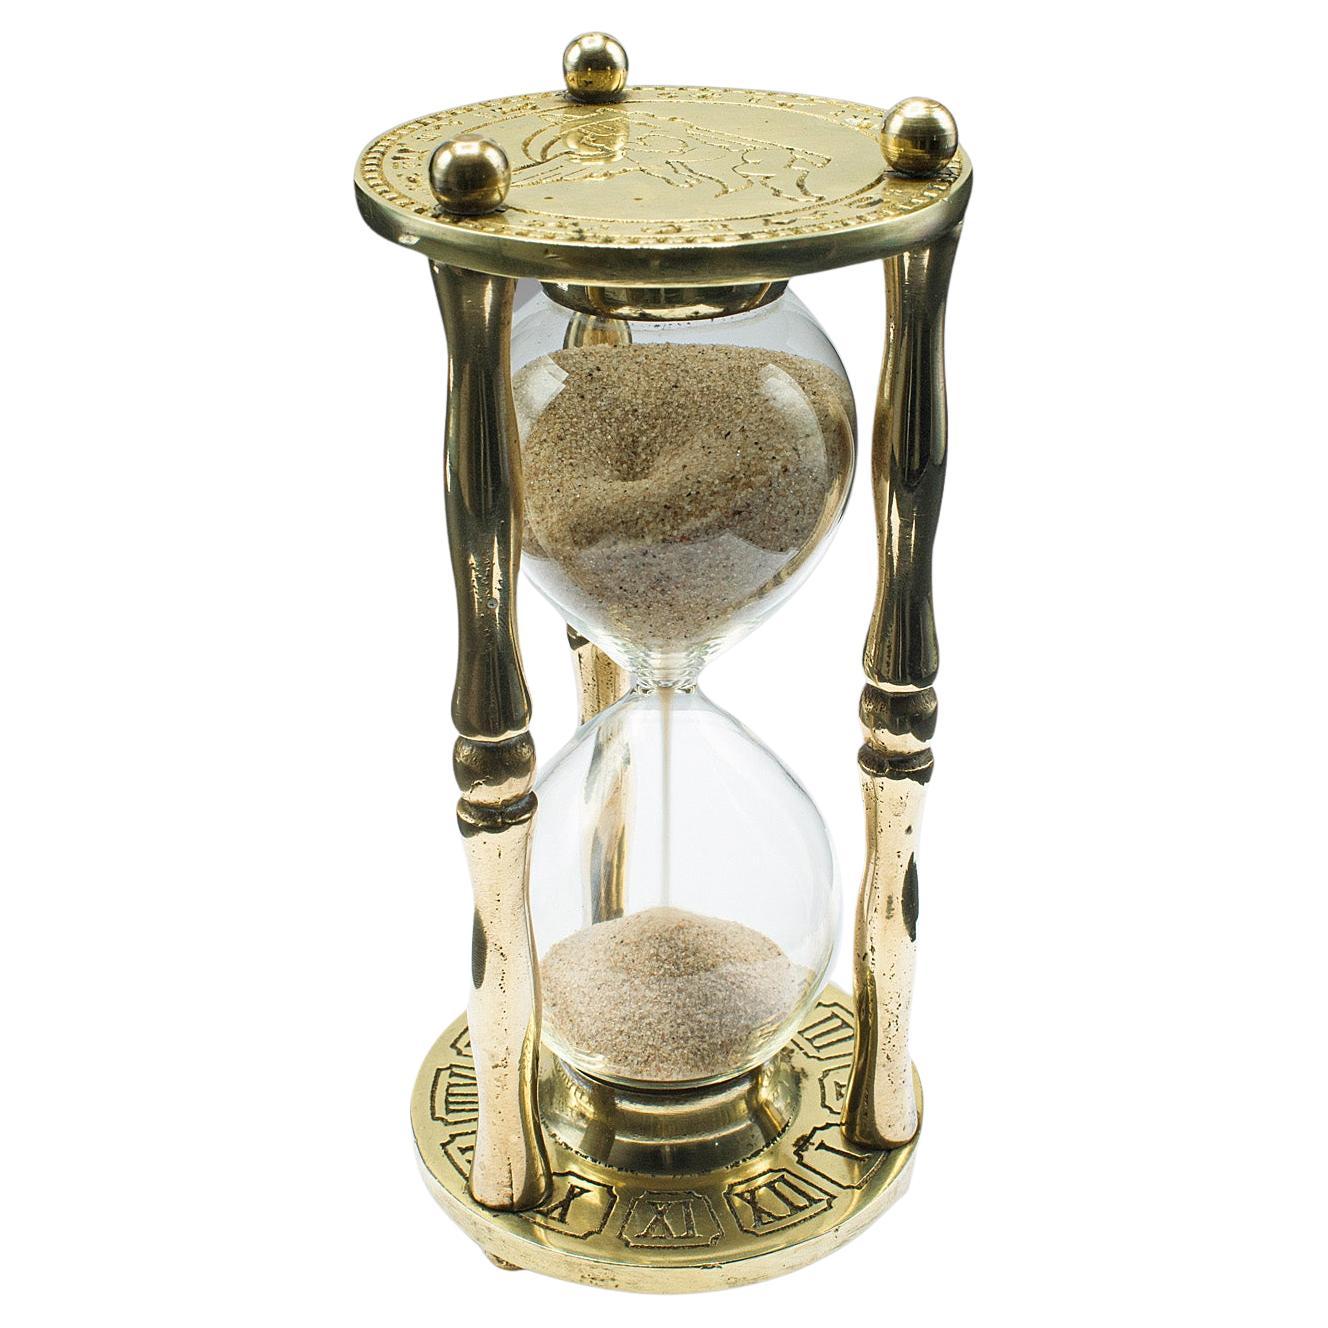 Vintage Egg Timer, English, Brass, Glass, 3 Minute Sand Countdown, Mid-Century For Sale